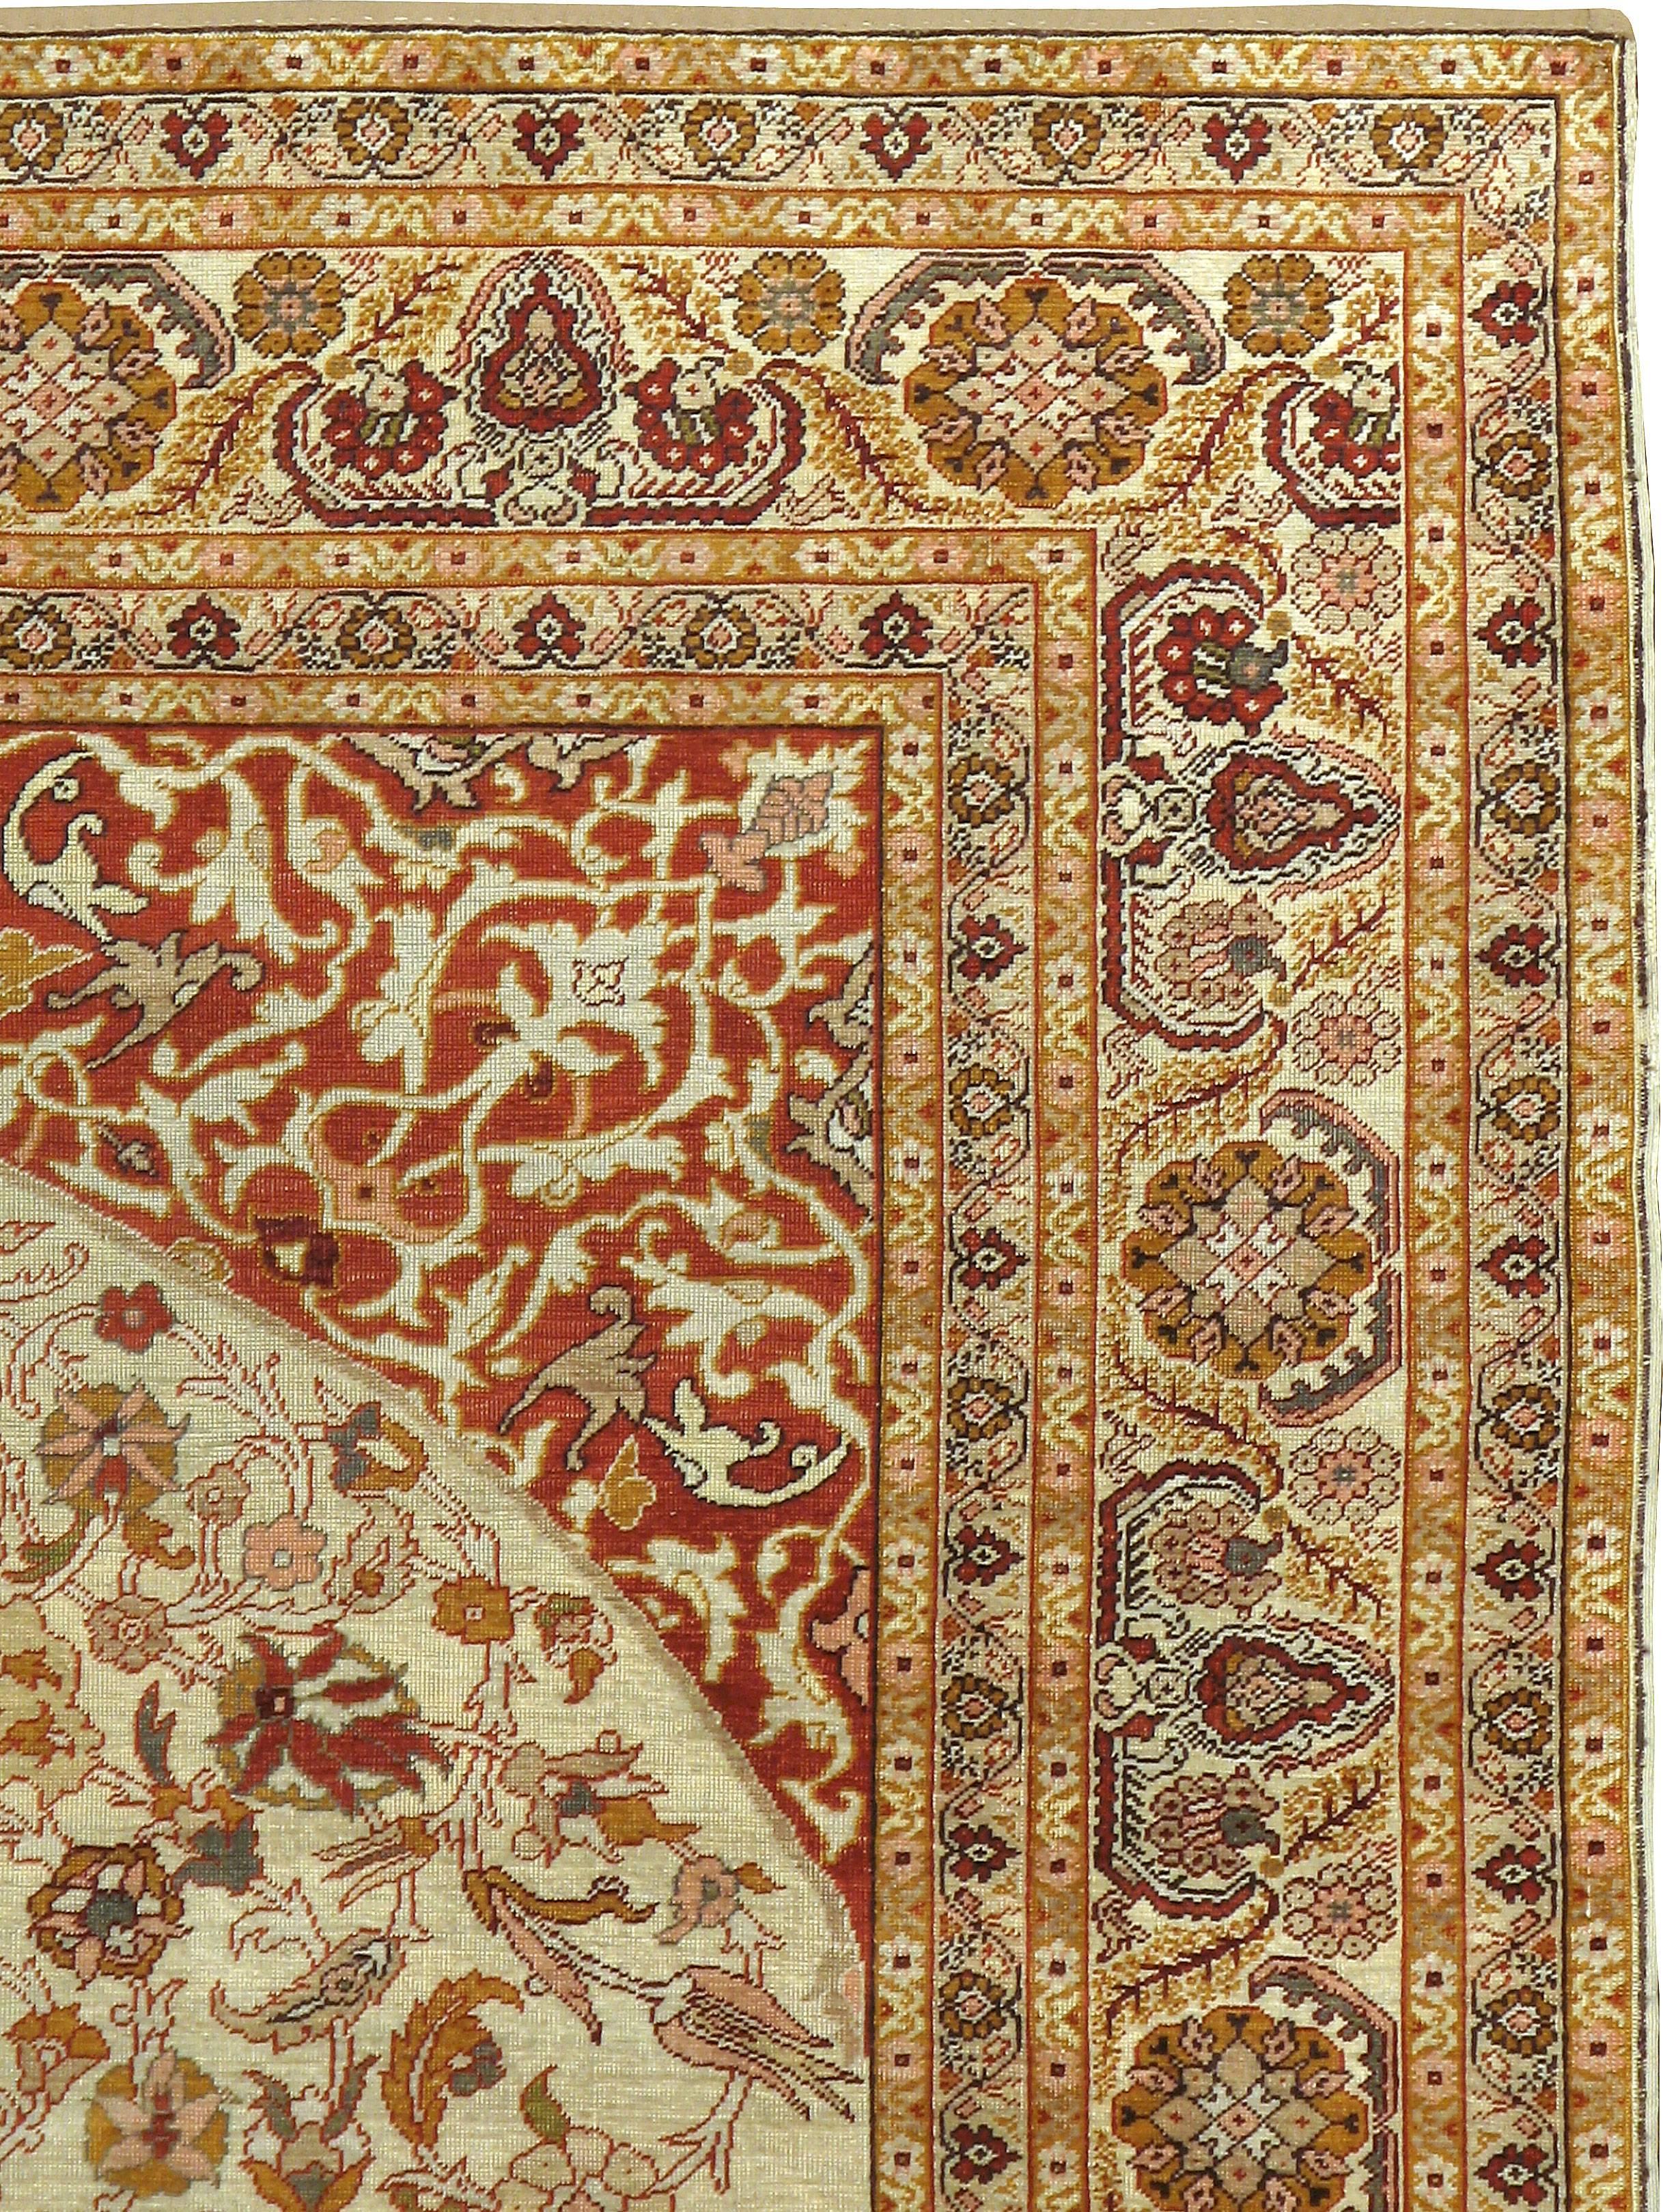 An antique Turkish Kayseri carpet from the first quarter of the 20th century.